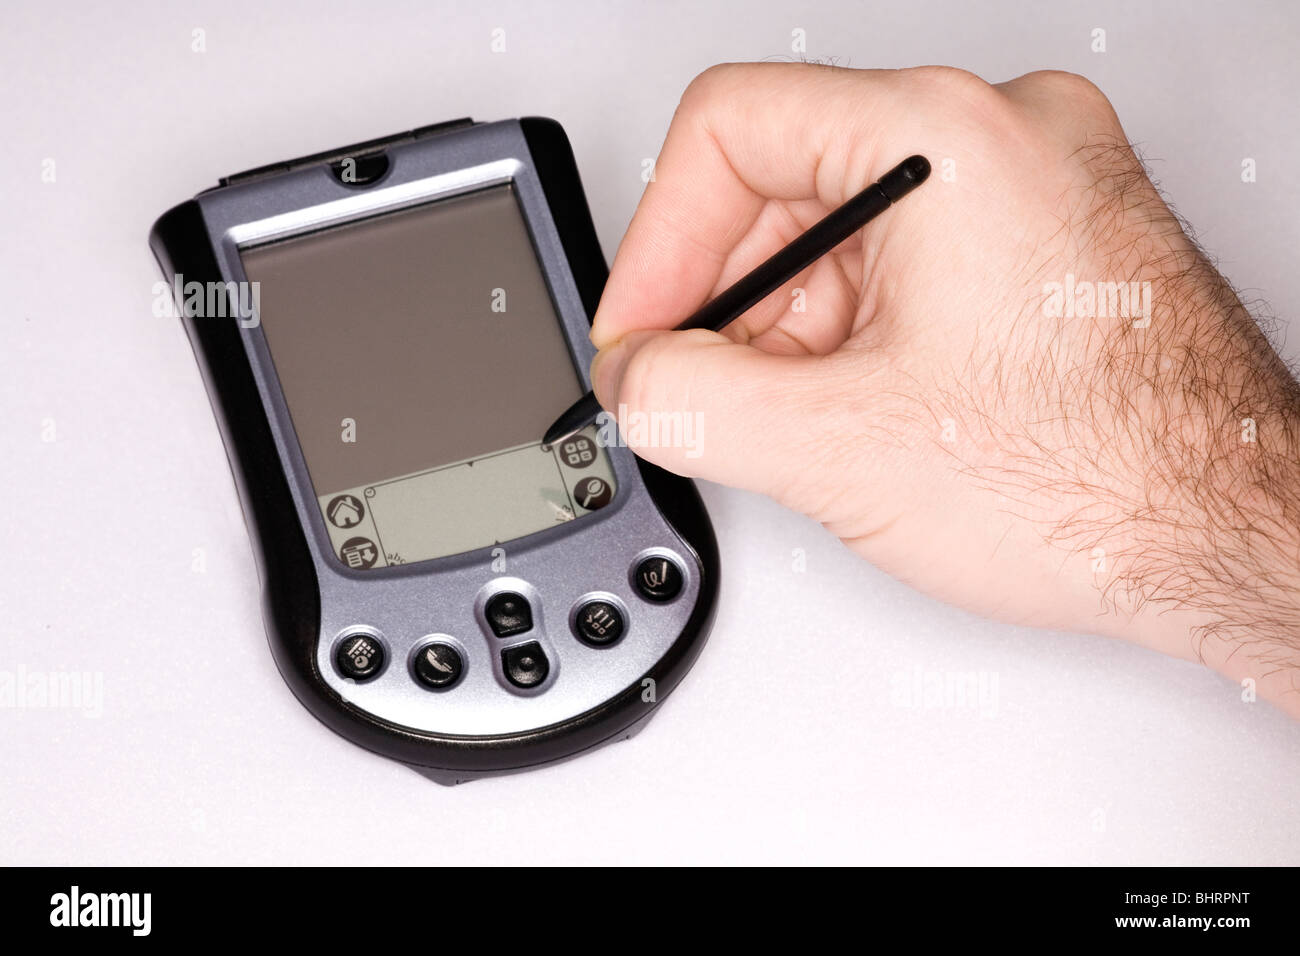 Personal Data Assistant (PDA) Stock Photo